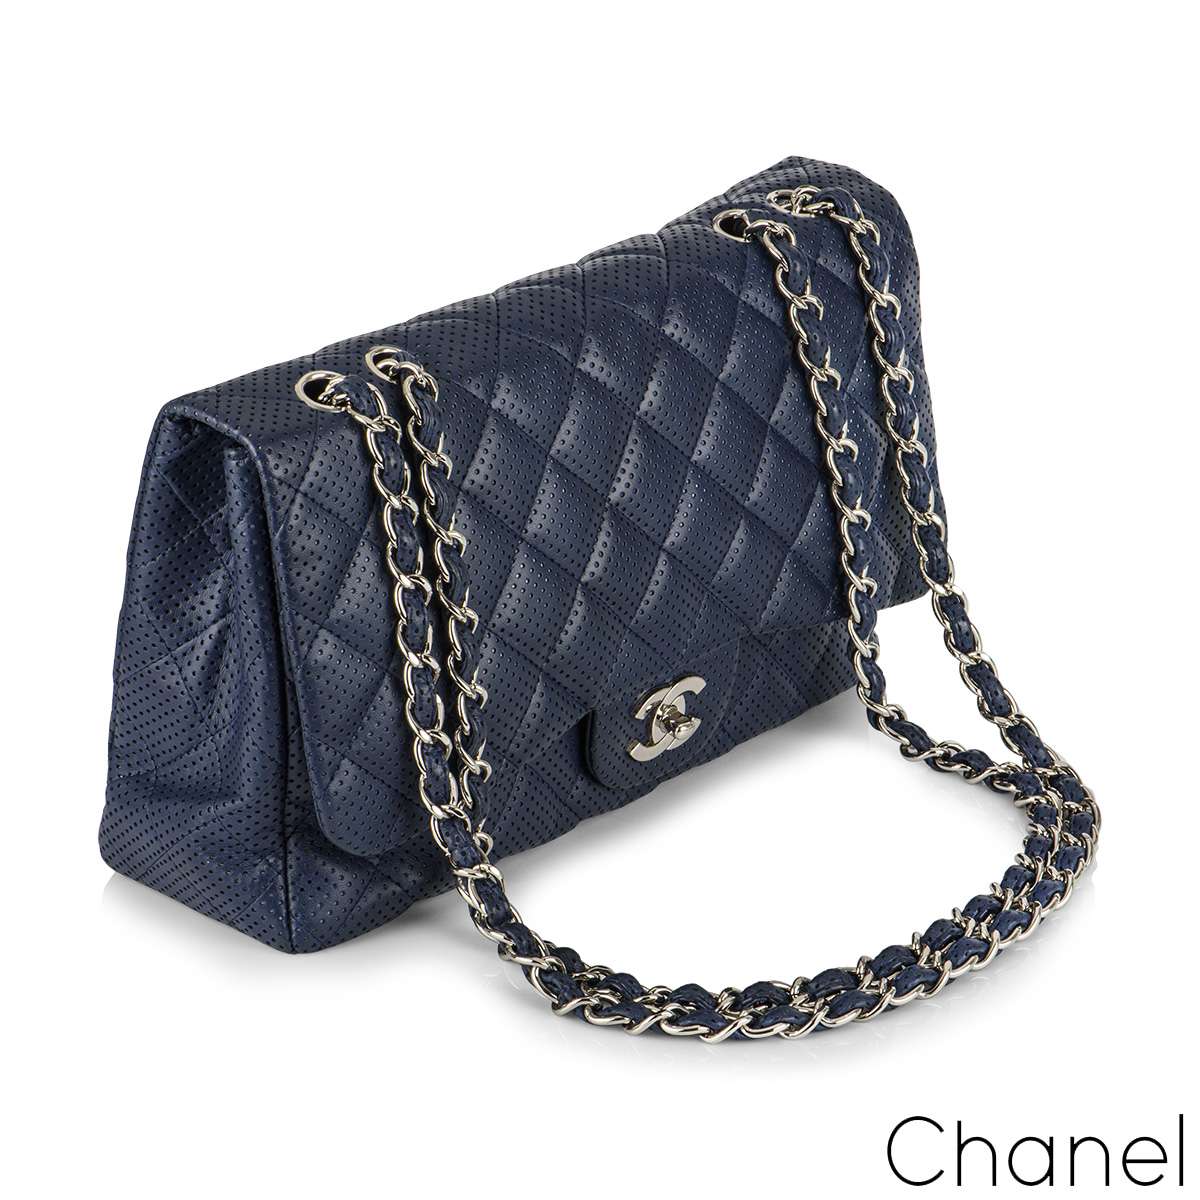 Sold at Auction: CHANEL, CLASSIC SINGLE FLAP JUMBO SHOULDER BAG